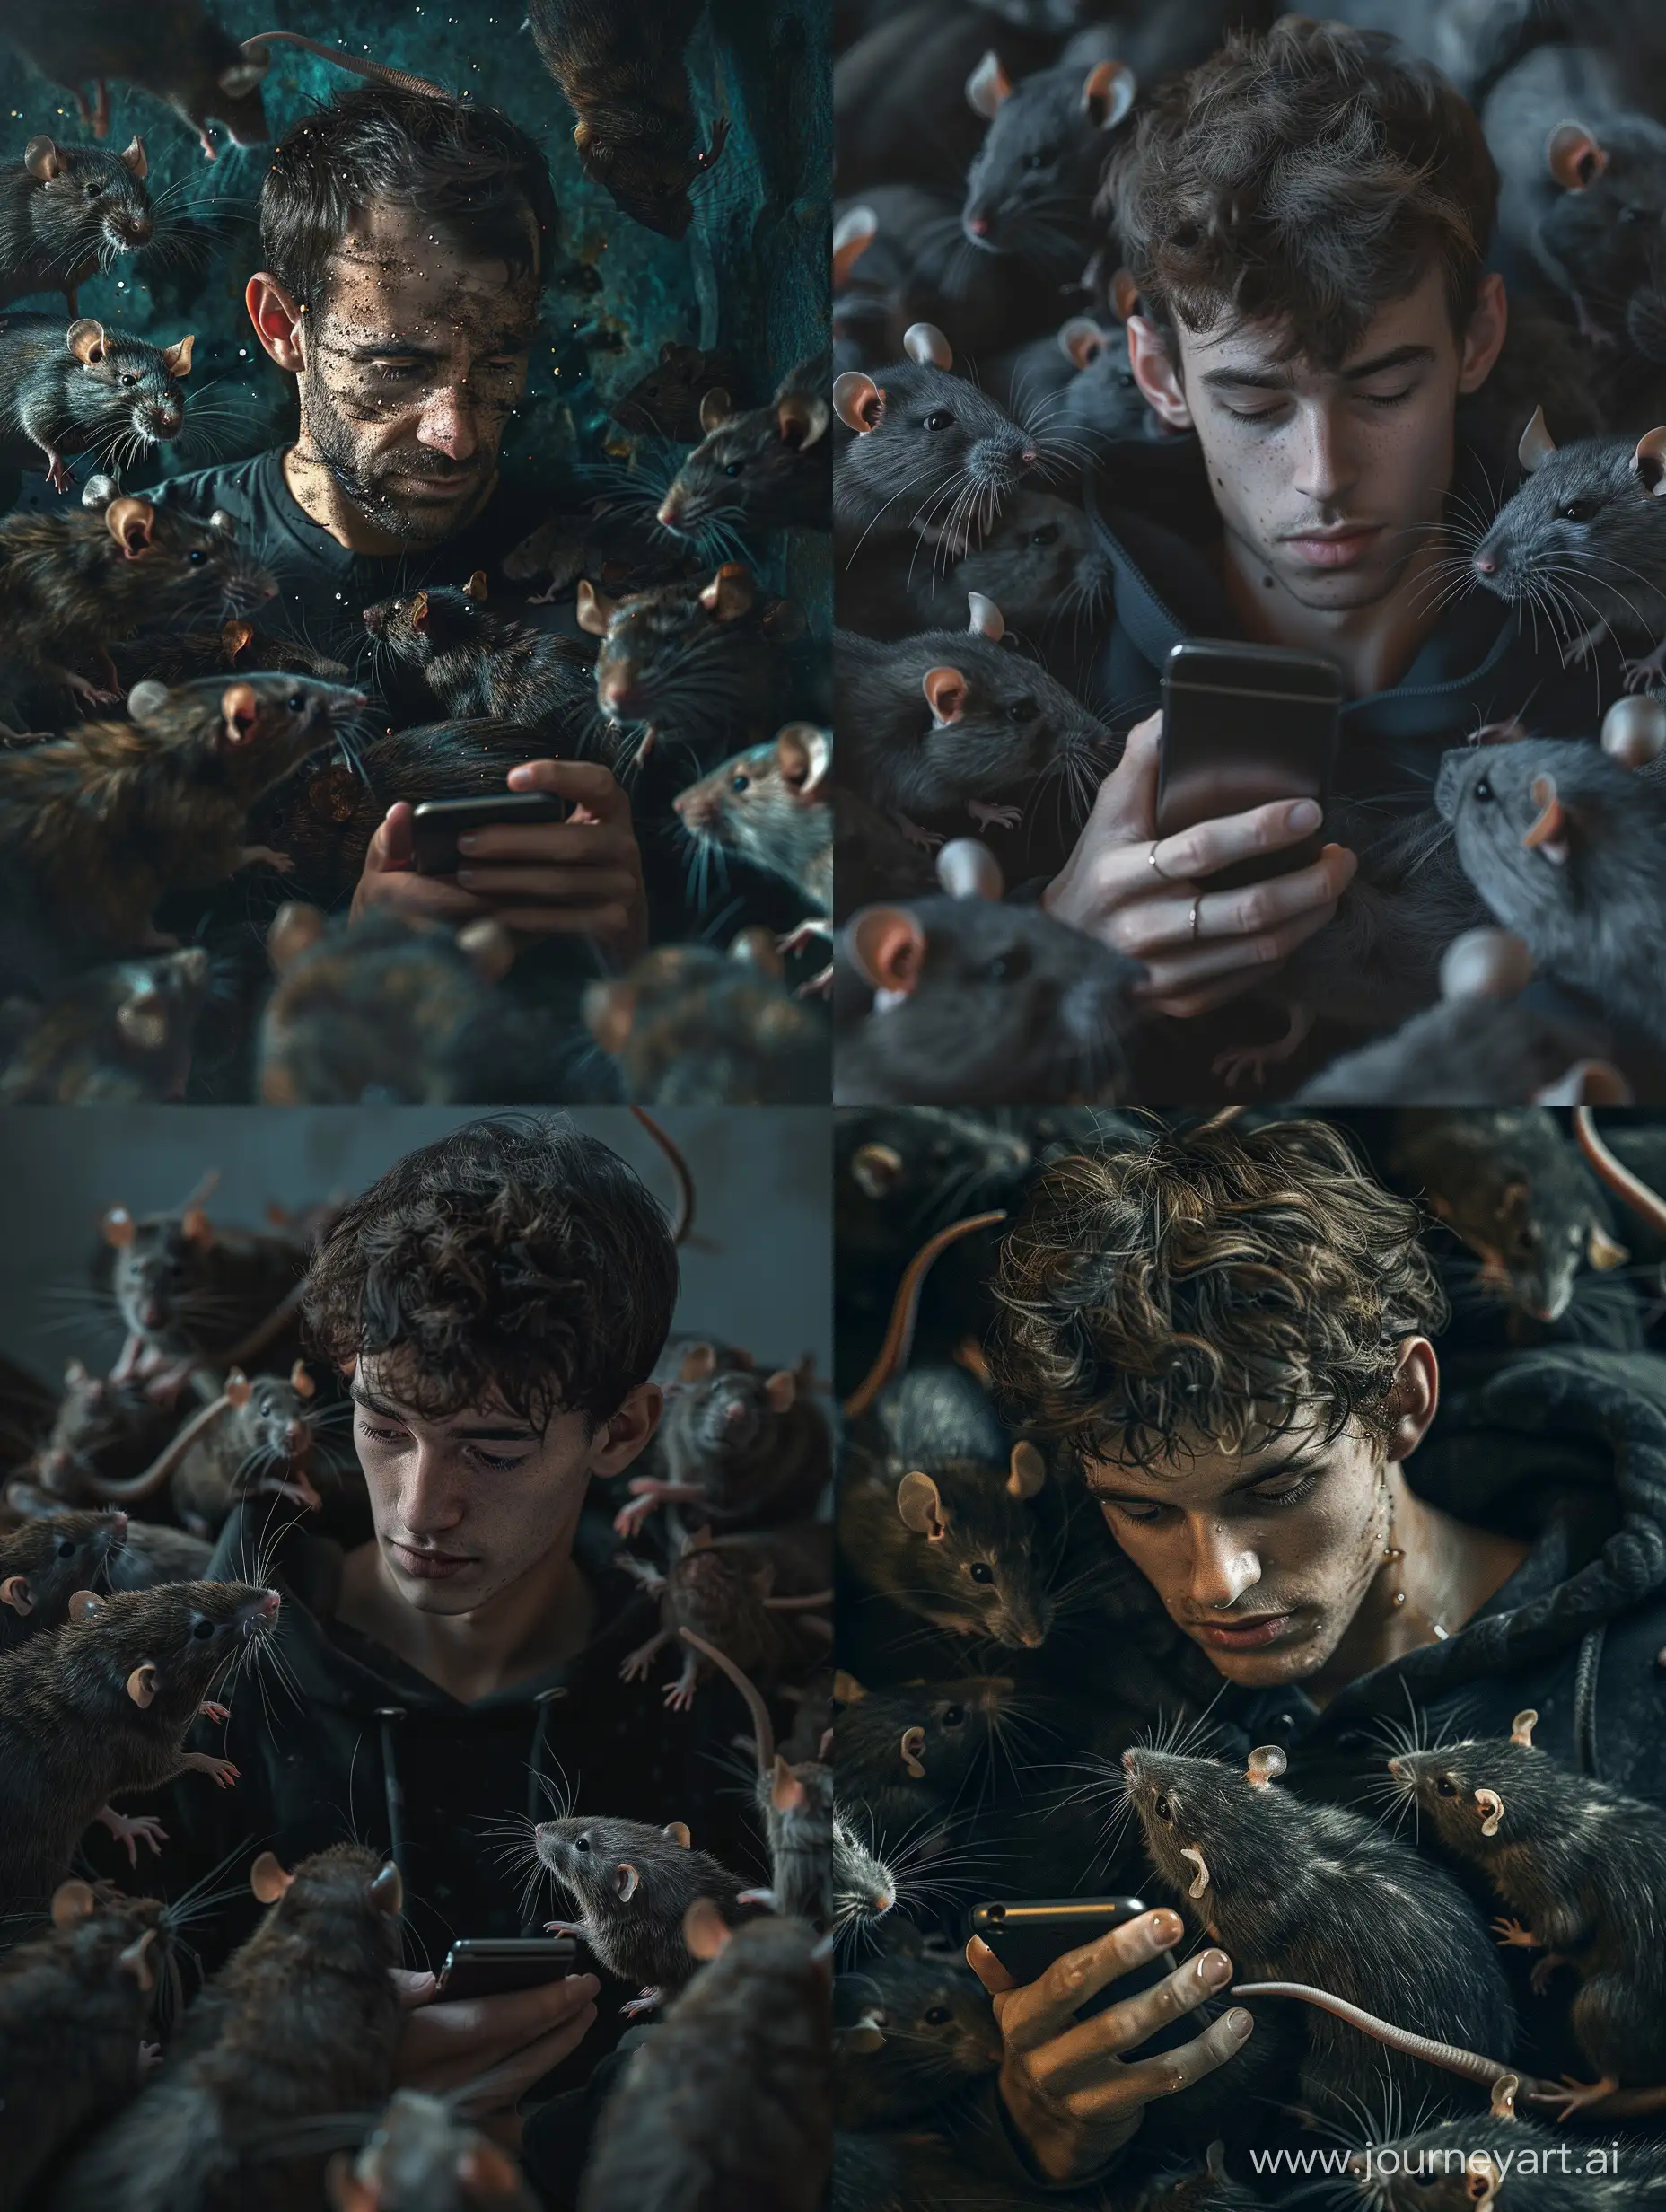 Urban-Encounter-Man-Engrossed-in-Cell-Phone-Surrounded-by-Rats